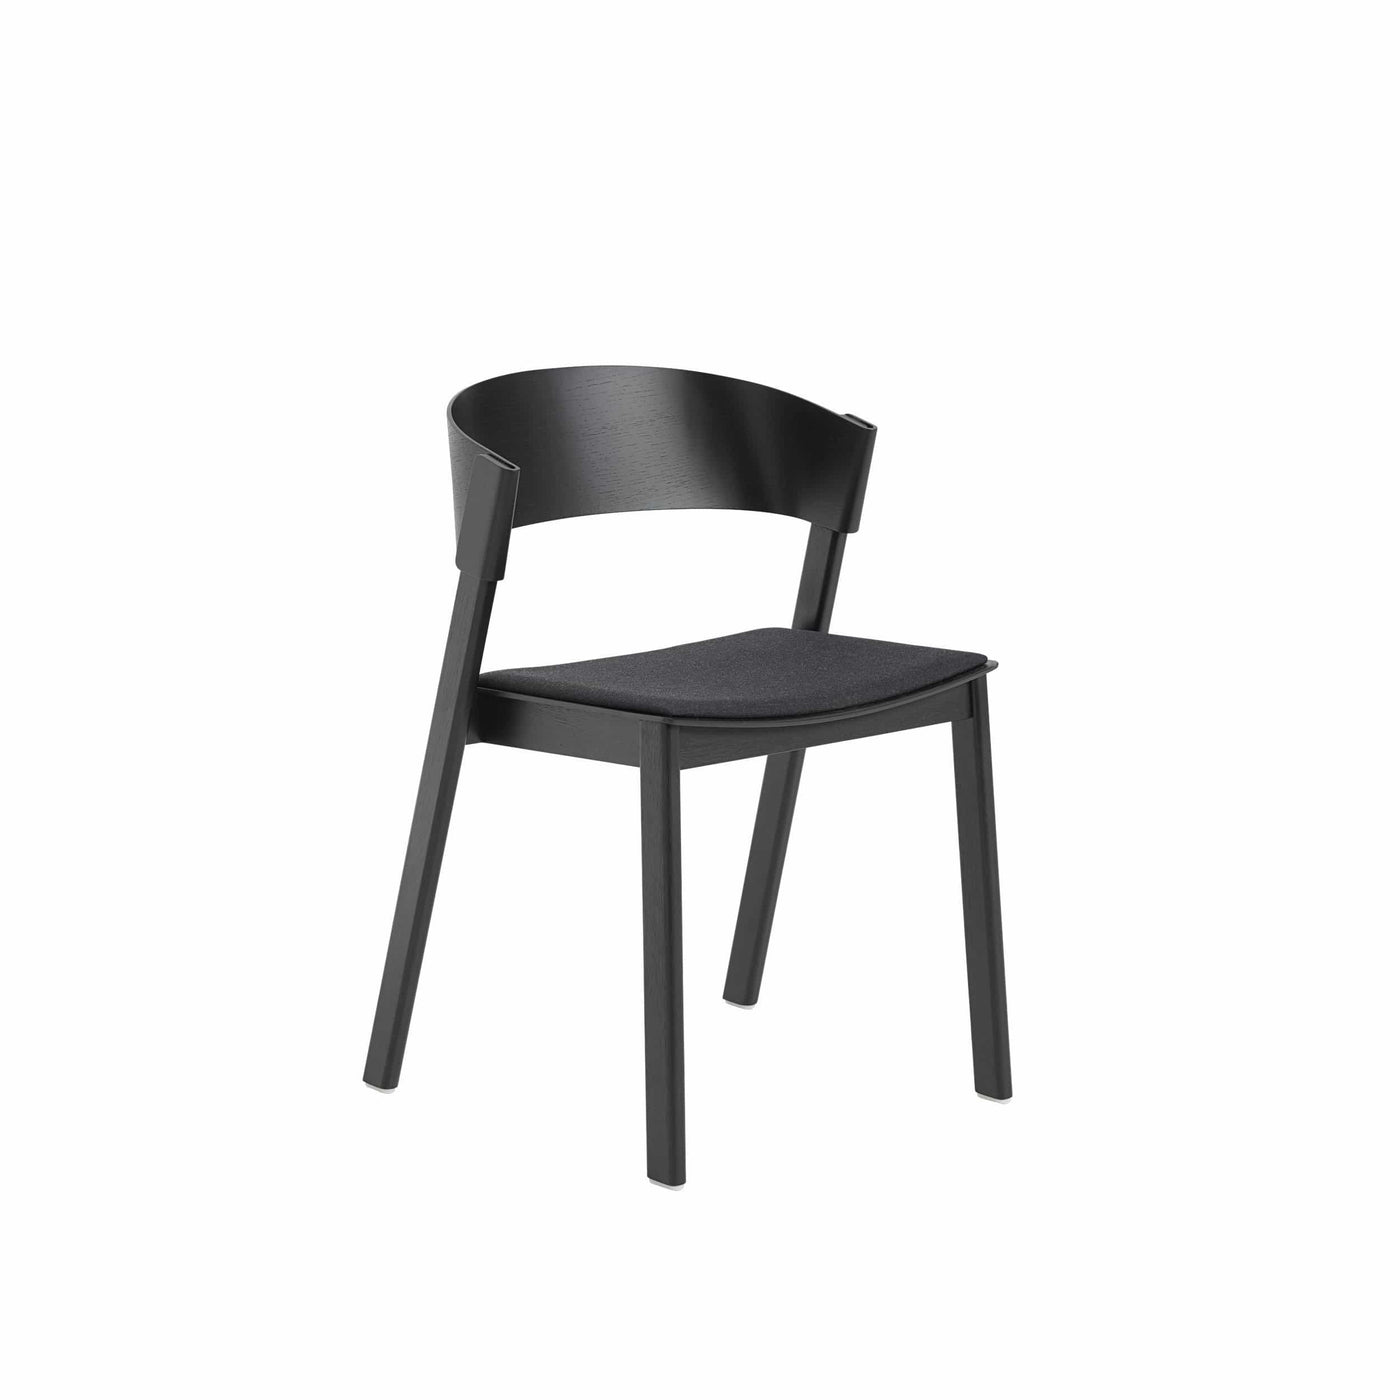 Muuto cover side chair in black and remix 183 Kvadrat upholstered seat, available from someday designs. #colour_remix-183-black